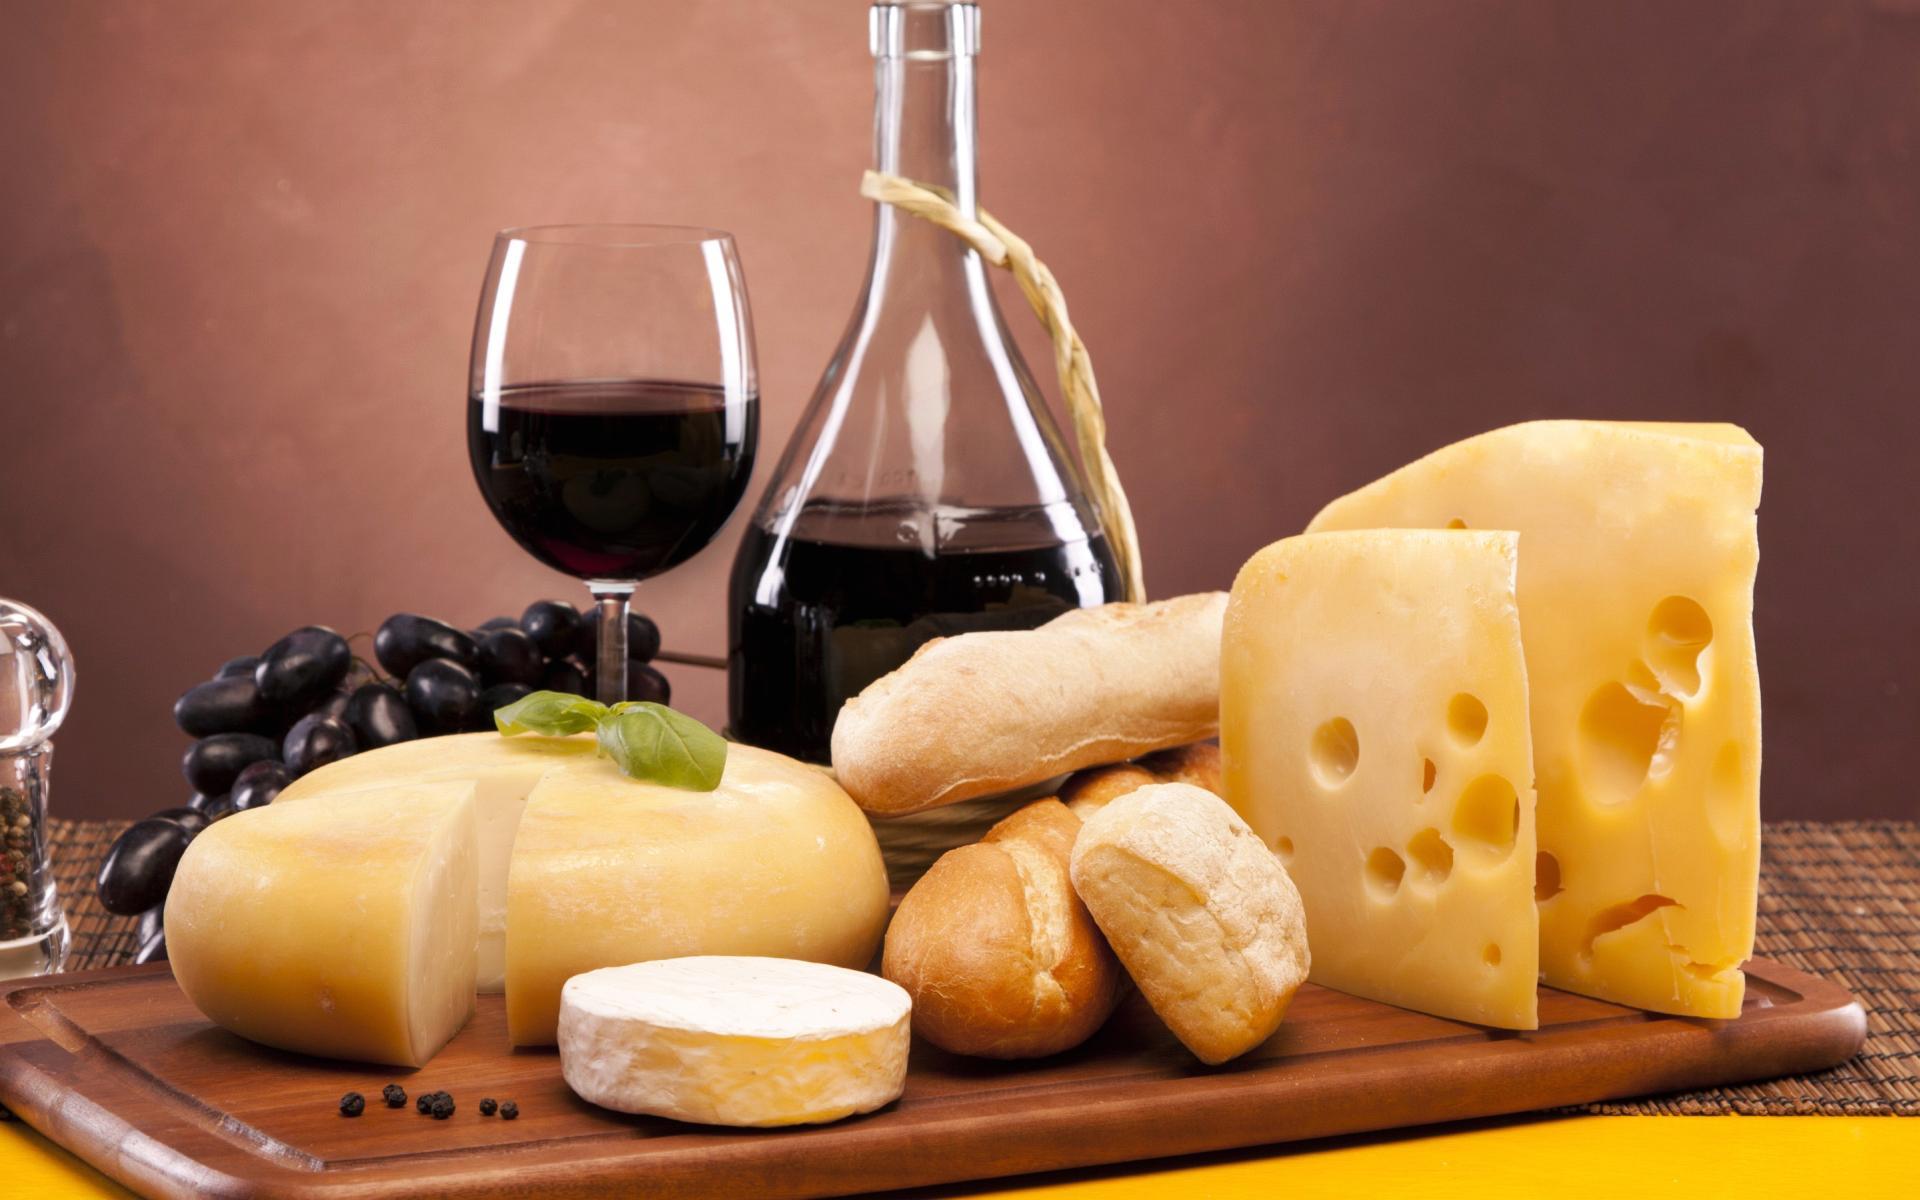 Cheese and Wine Wallpaper 51363 1920x1200 px